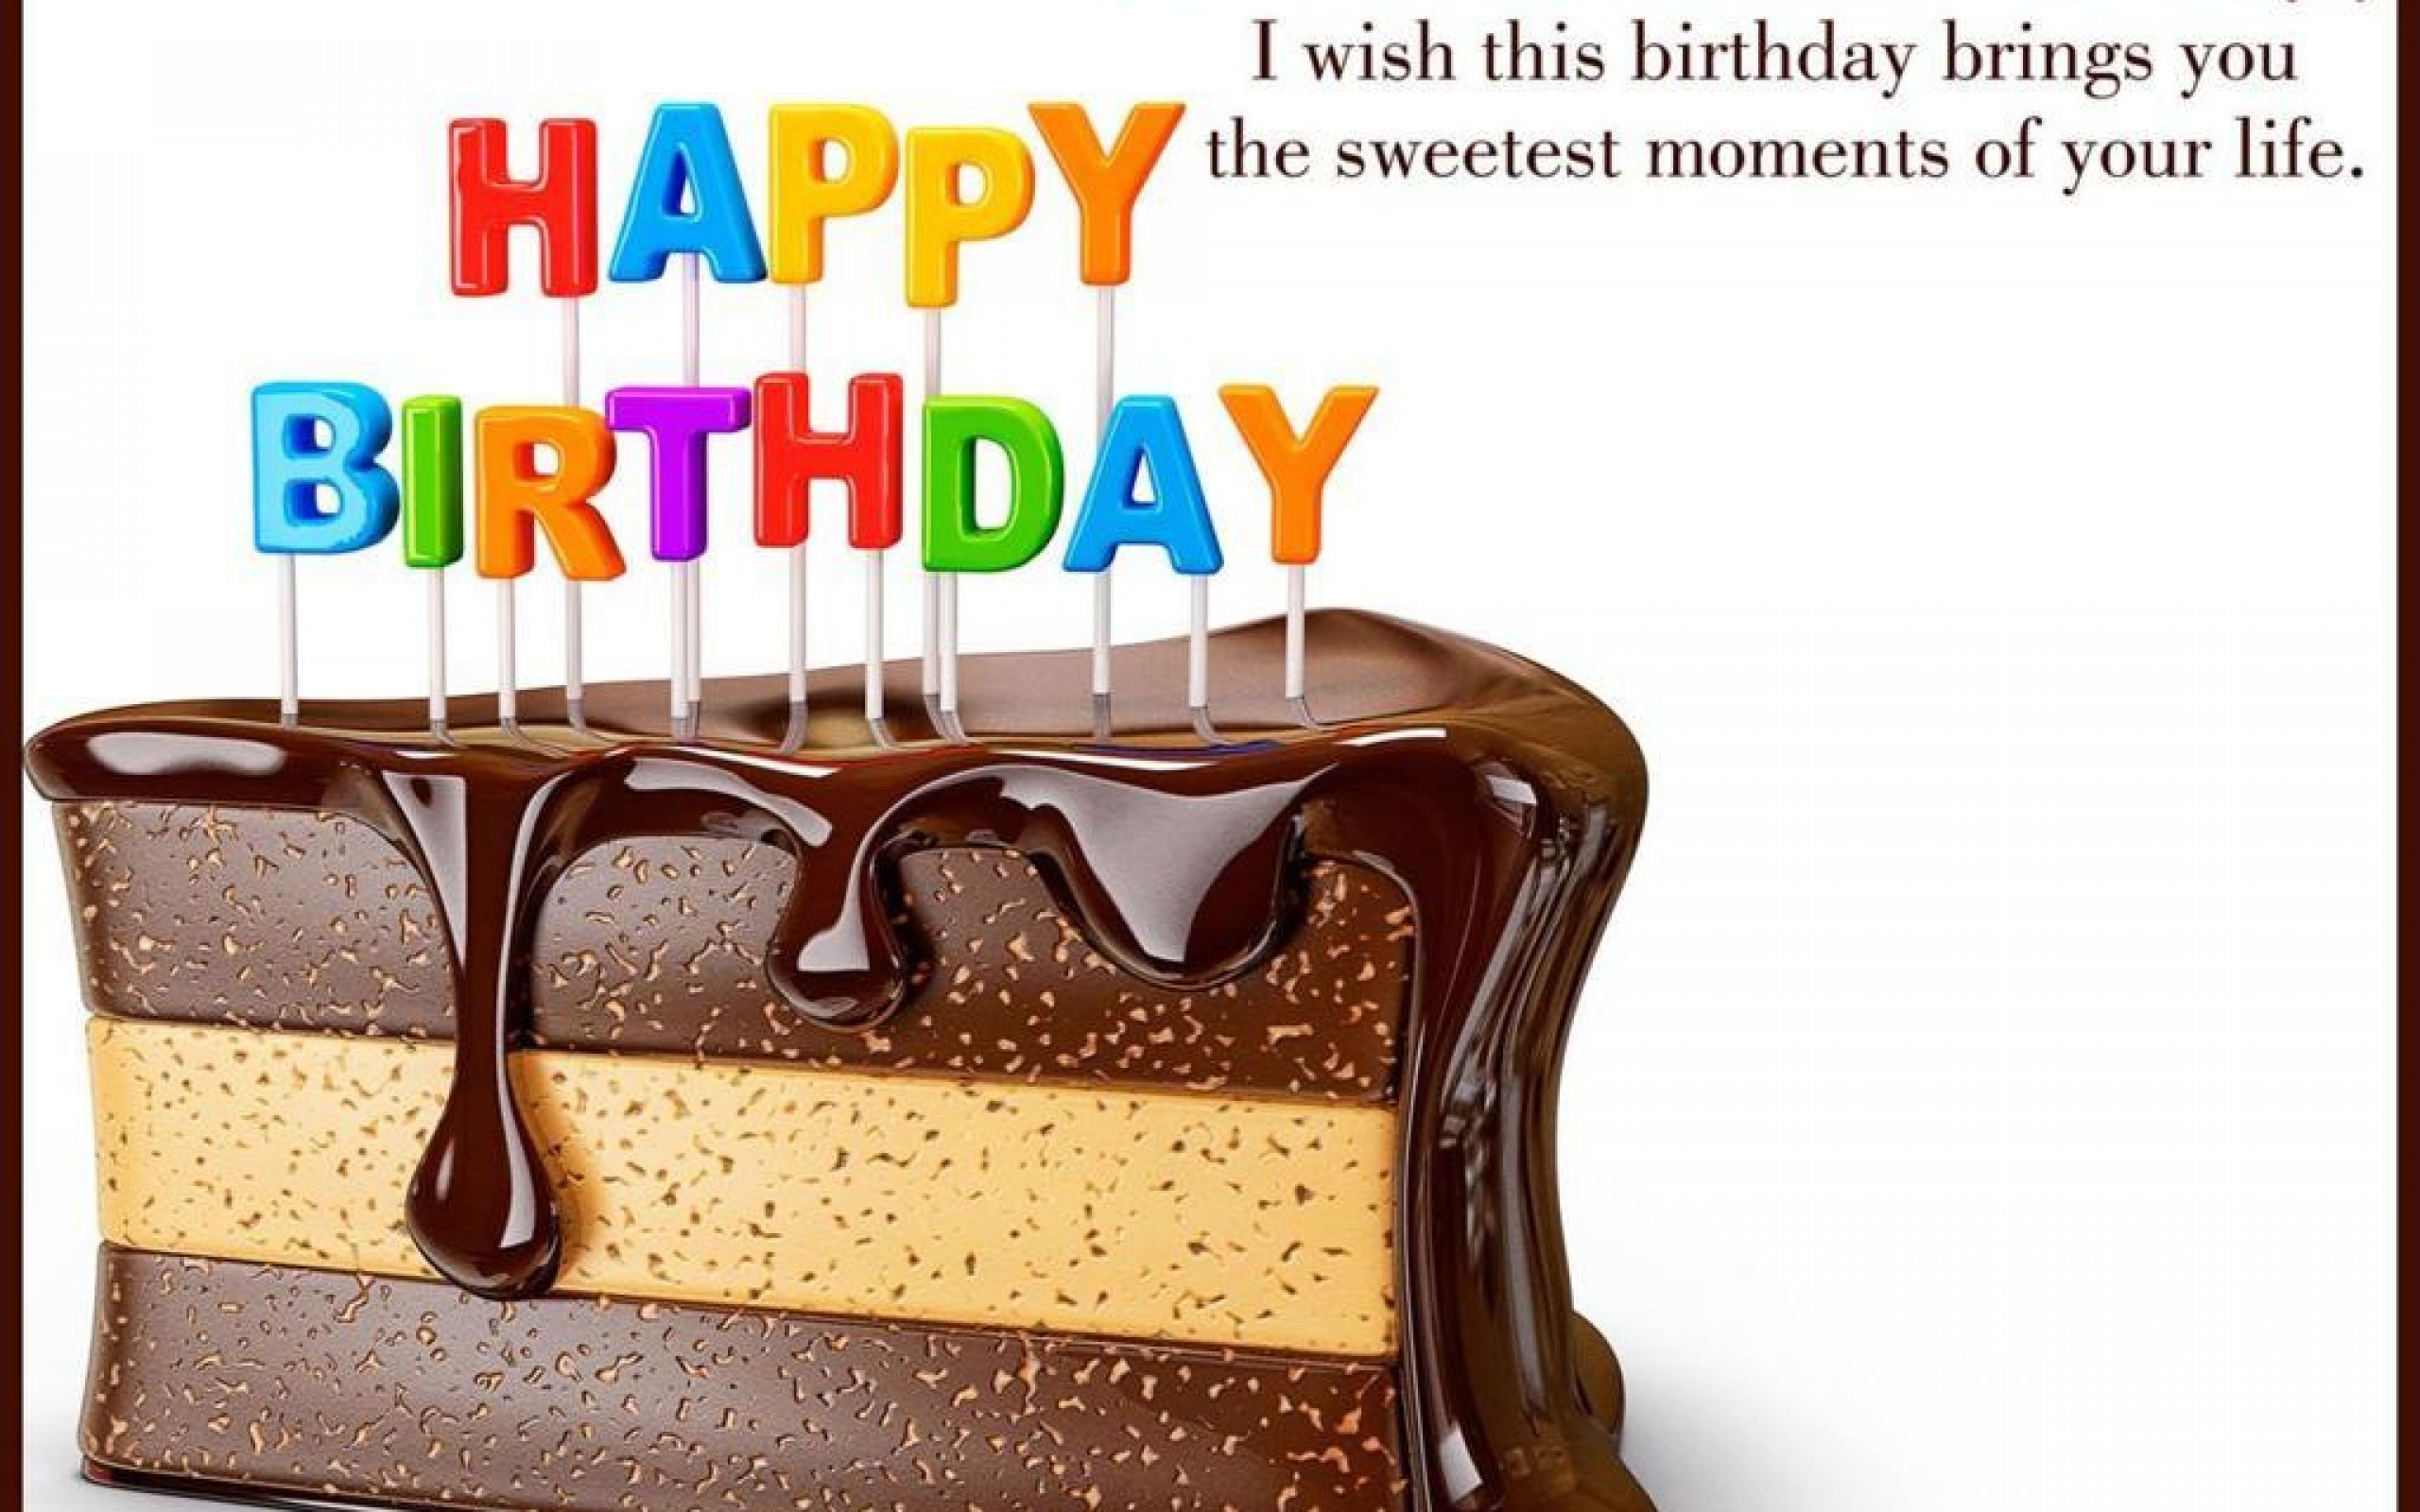 birthday wallpaper with quotes,chocolate cake,product,cake,buttercream,birthday cake